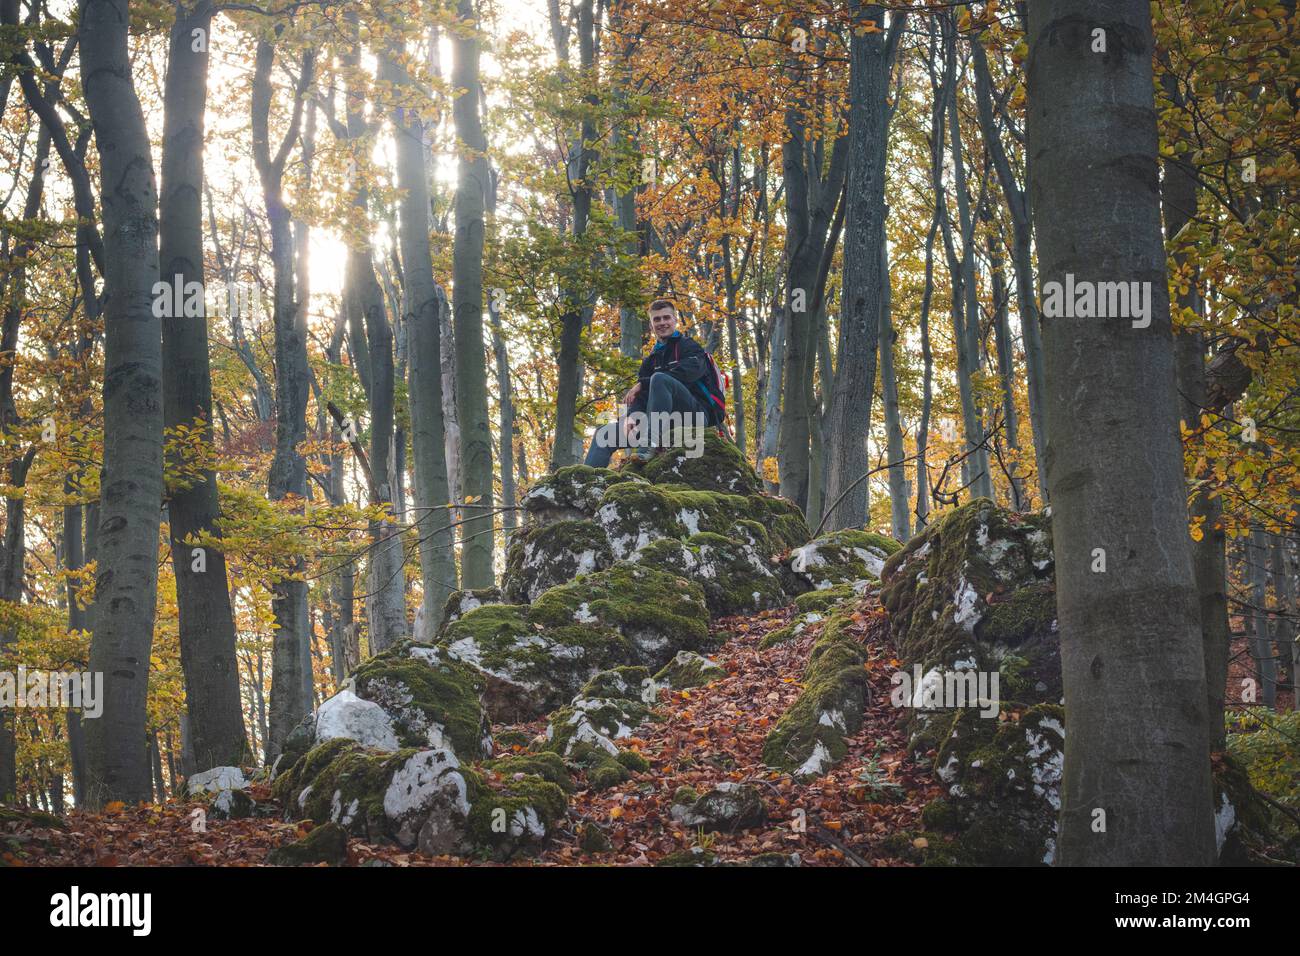 Adventurer sitting on a rock in autumn forest in Strazovske mountains, Slovakia. A man with a smile rests after a hard hike. Stock Photo